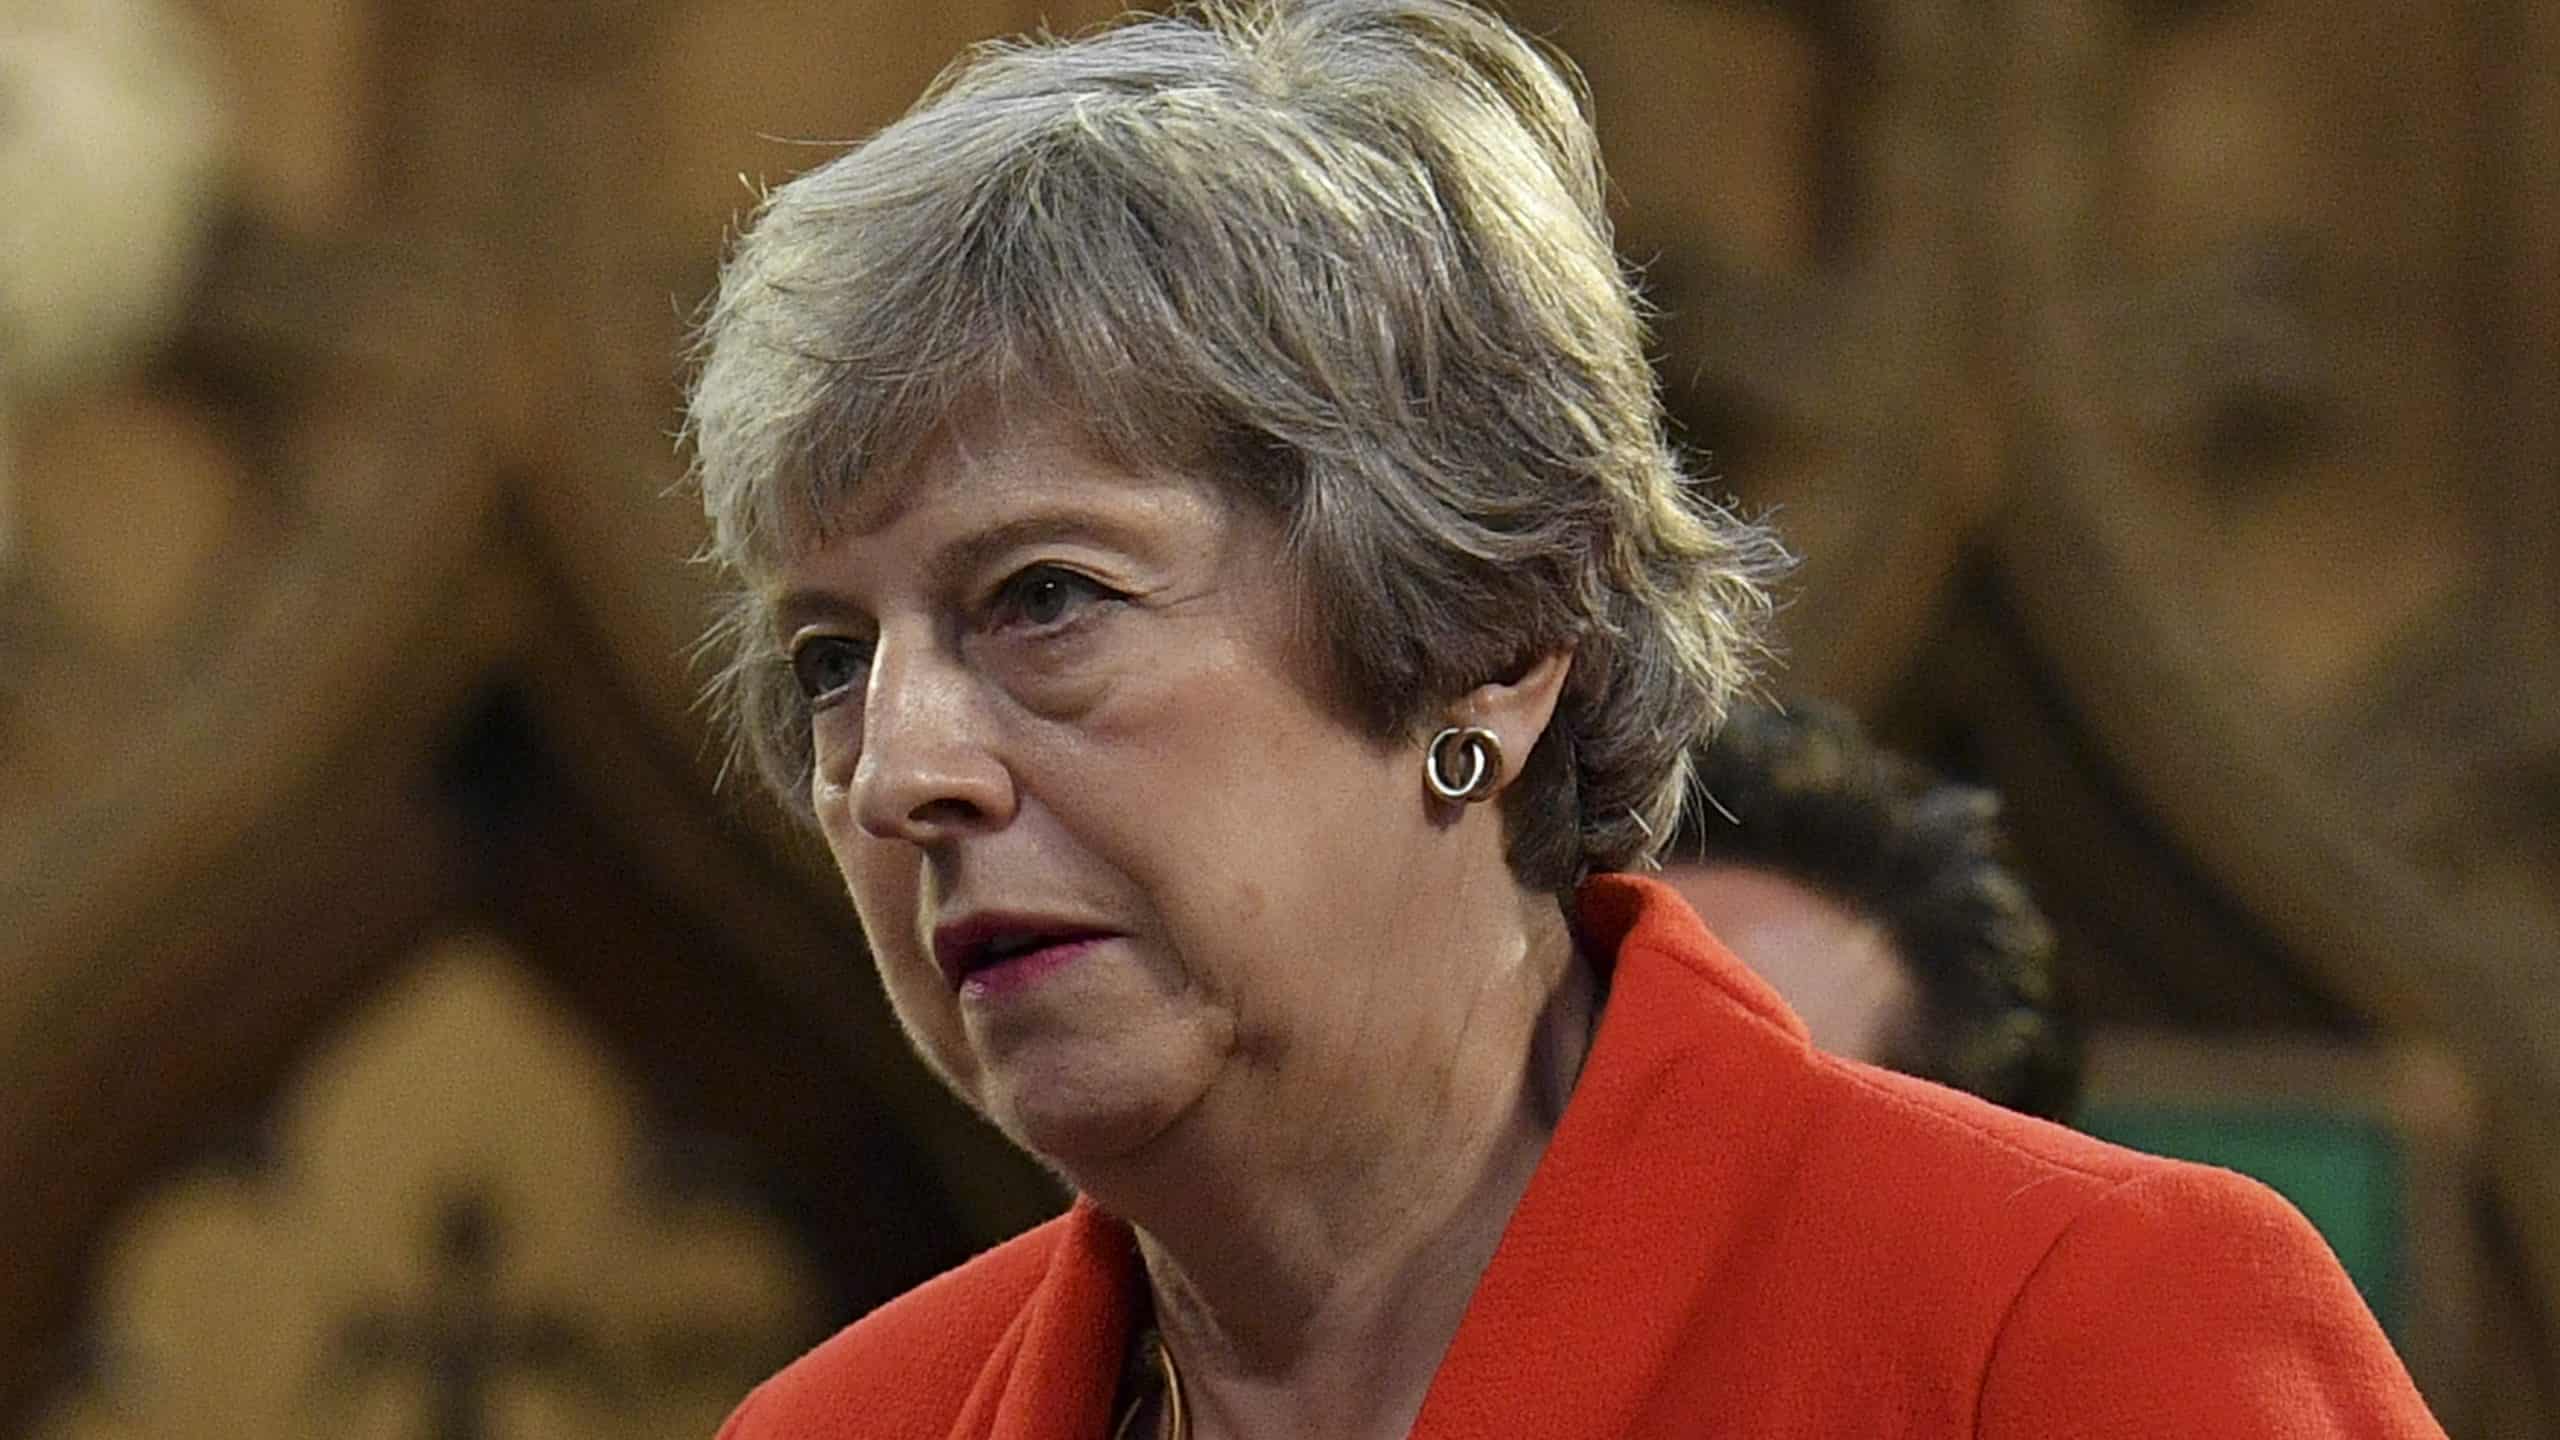 Theresa May confirms she will vote against “reckless and irresponsible” Brexit bill